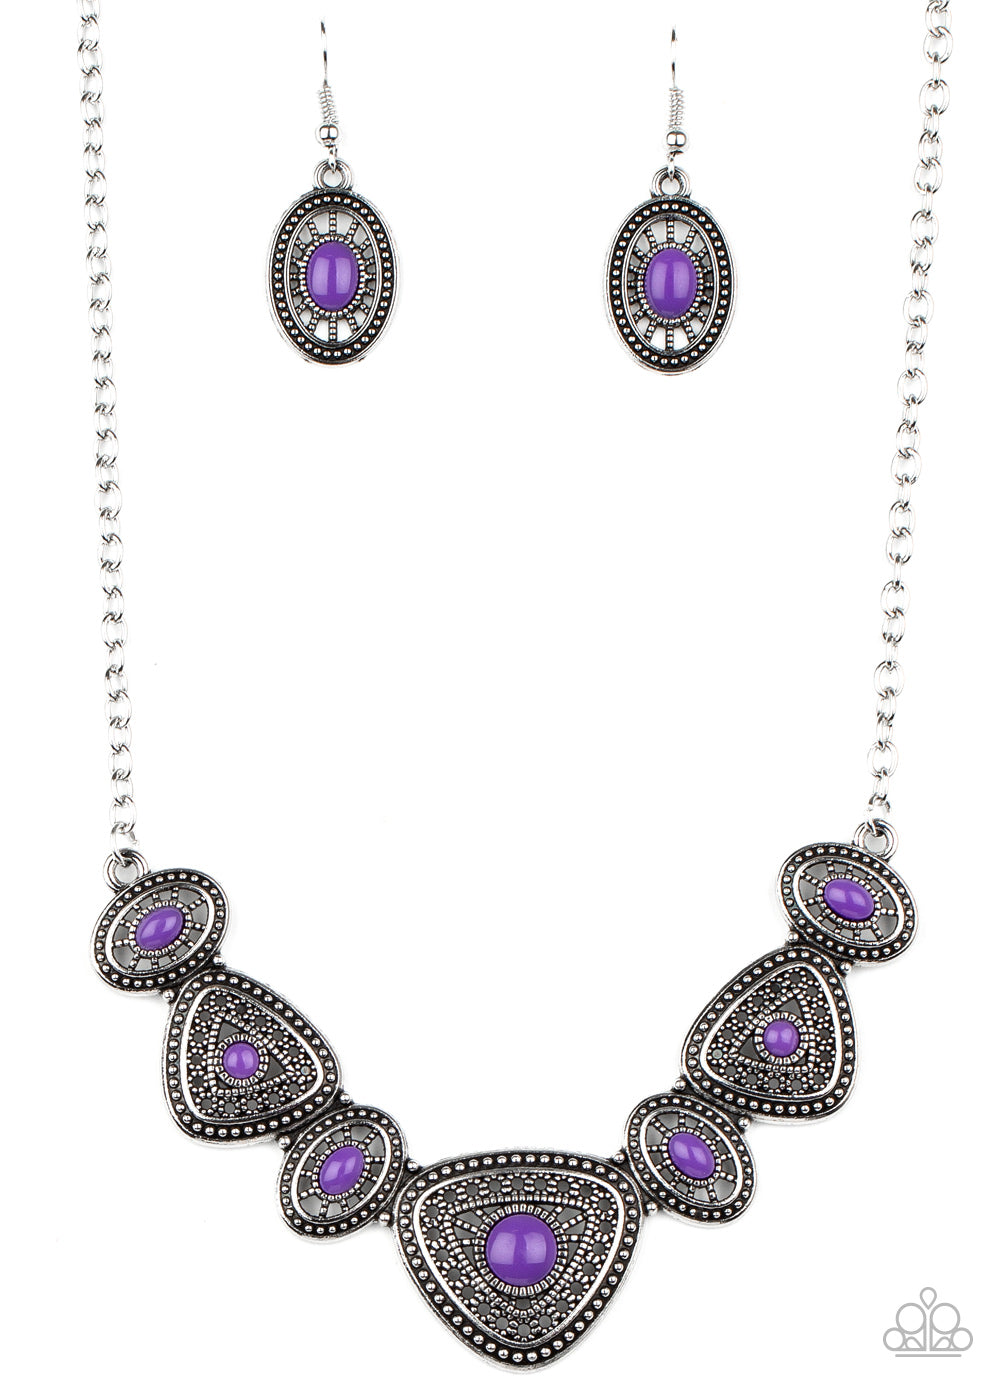 Totally TERRA-torial - purple - Paparazzi necklace